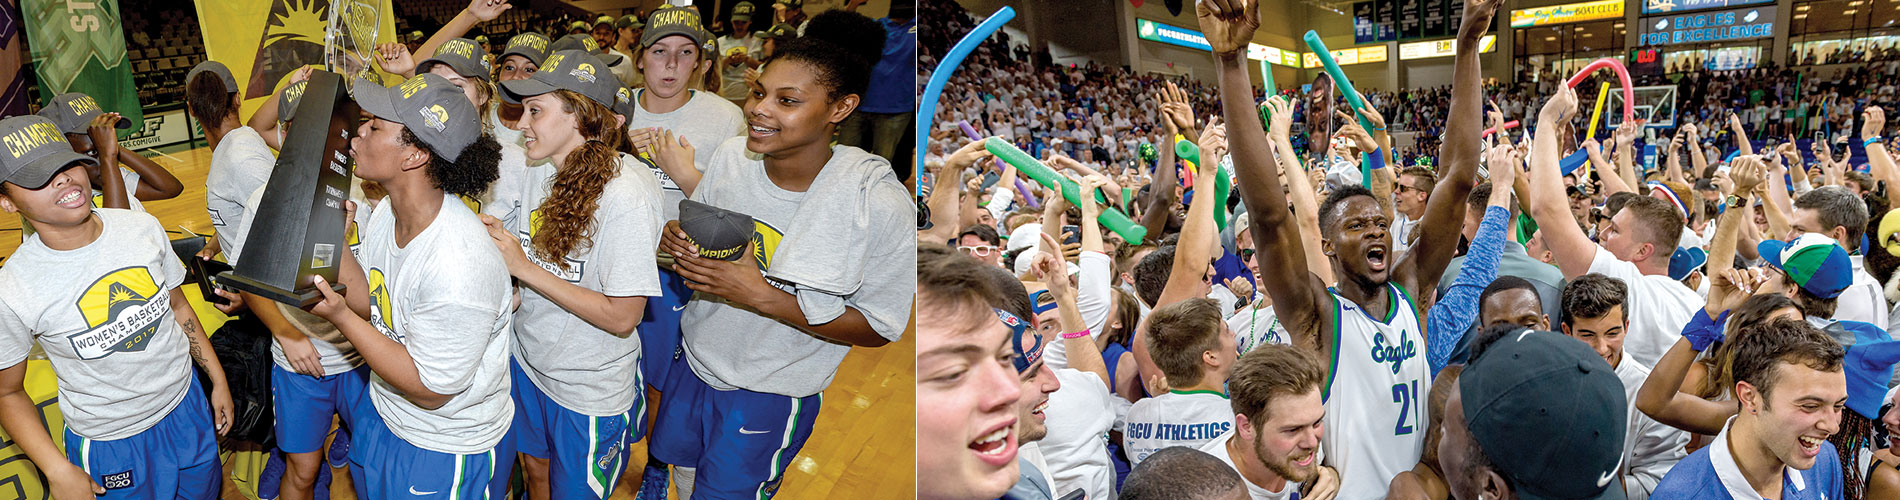 FGCU men's and women's basketball at the big dance.